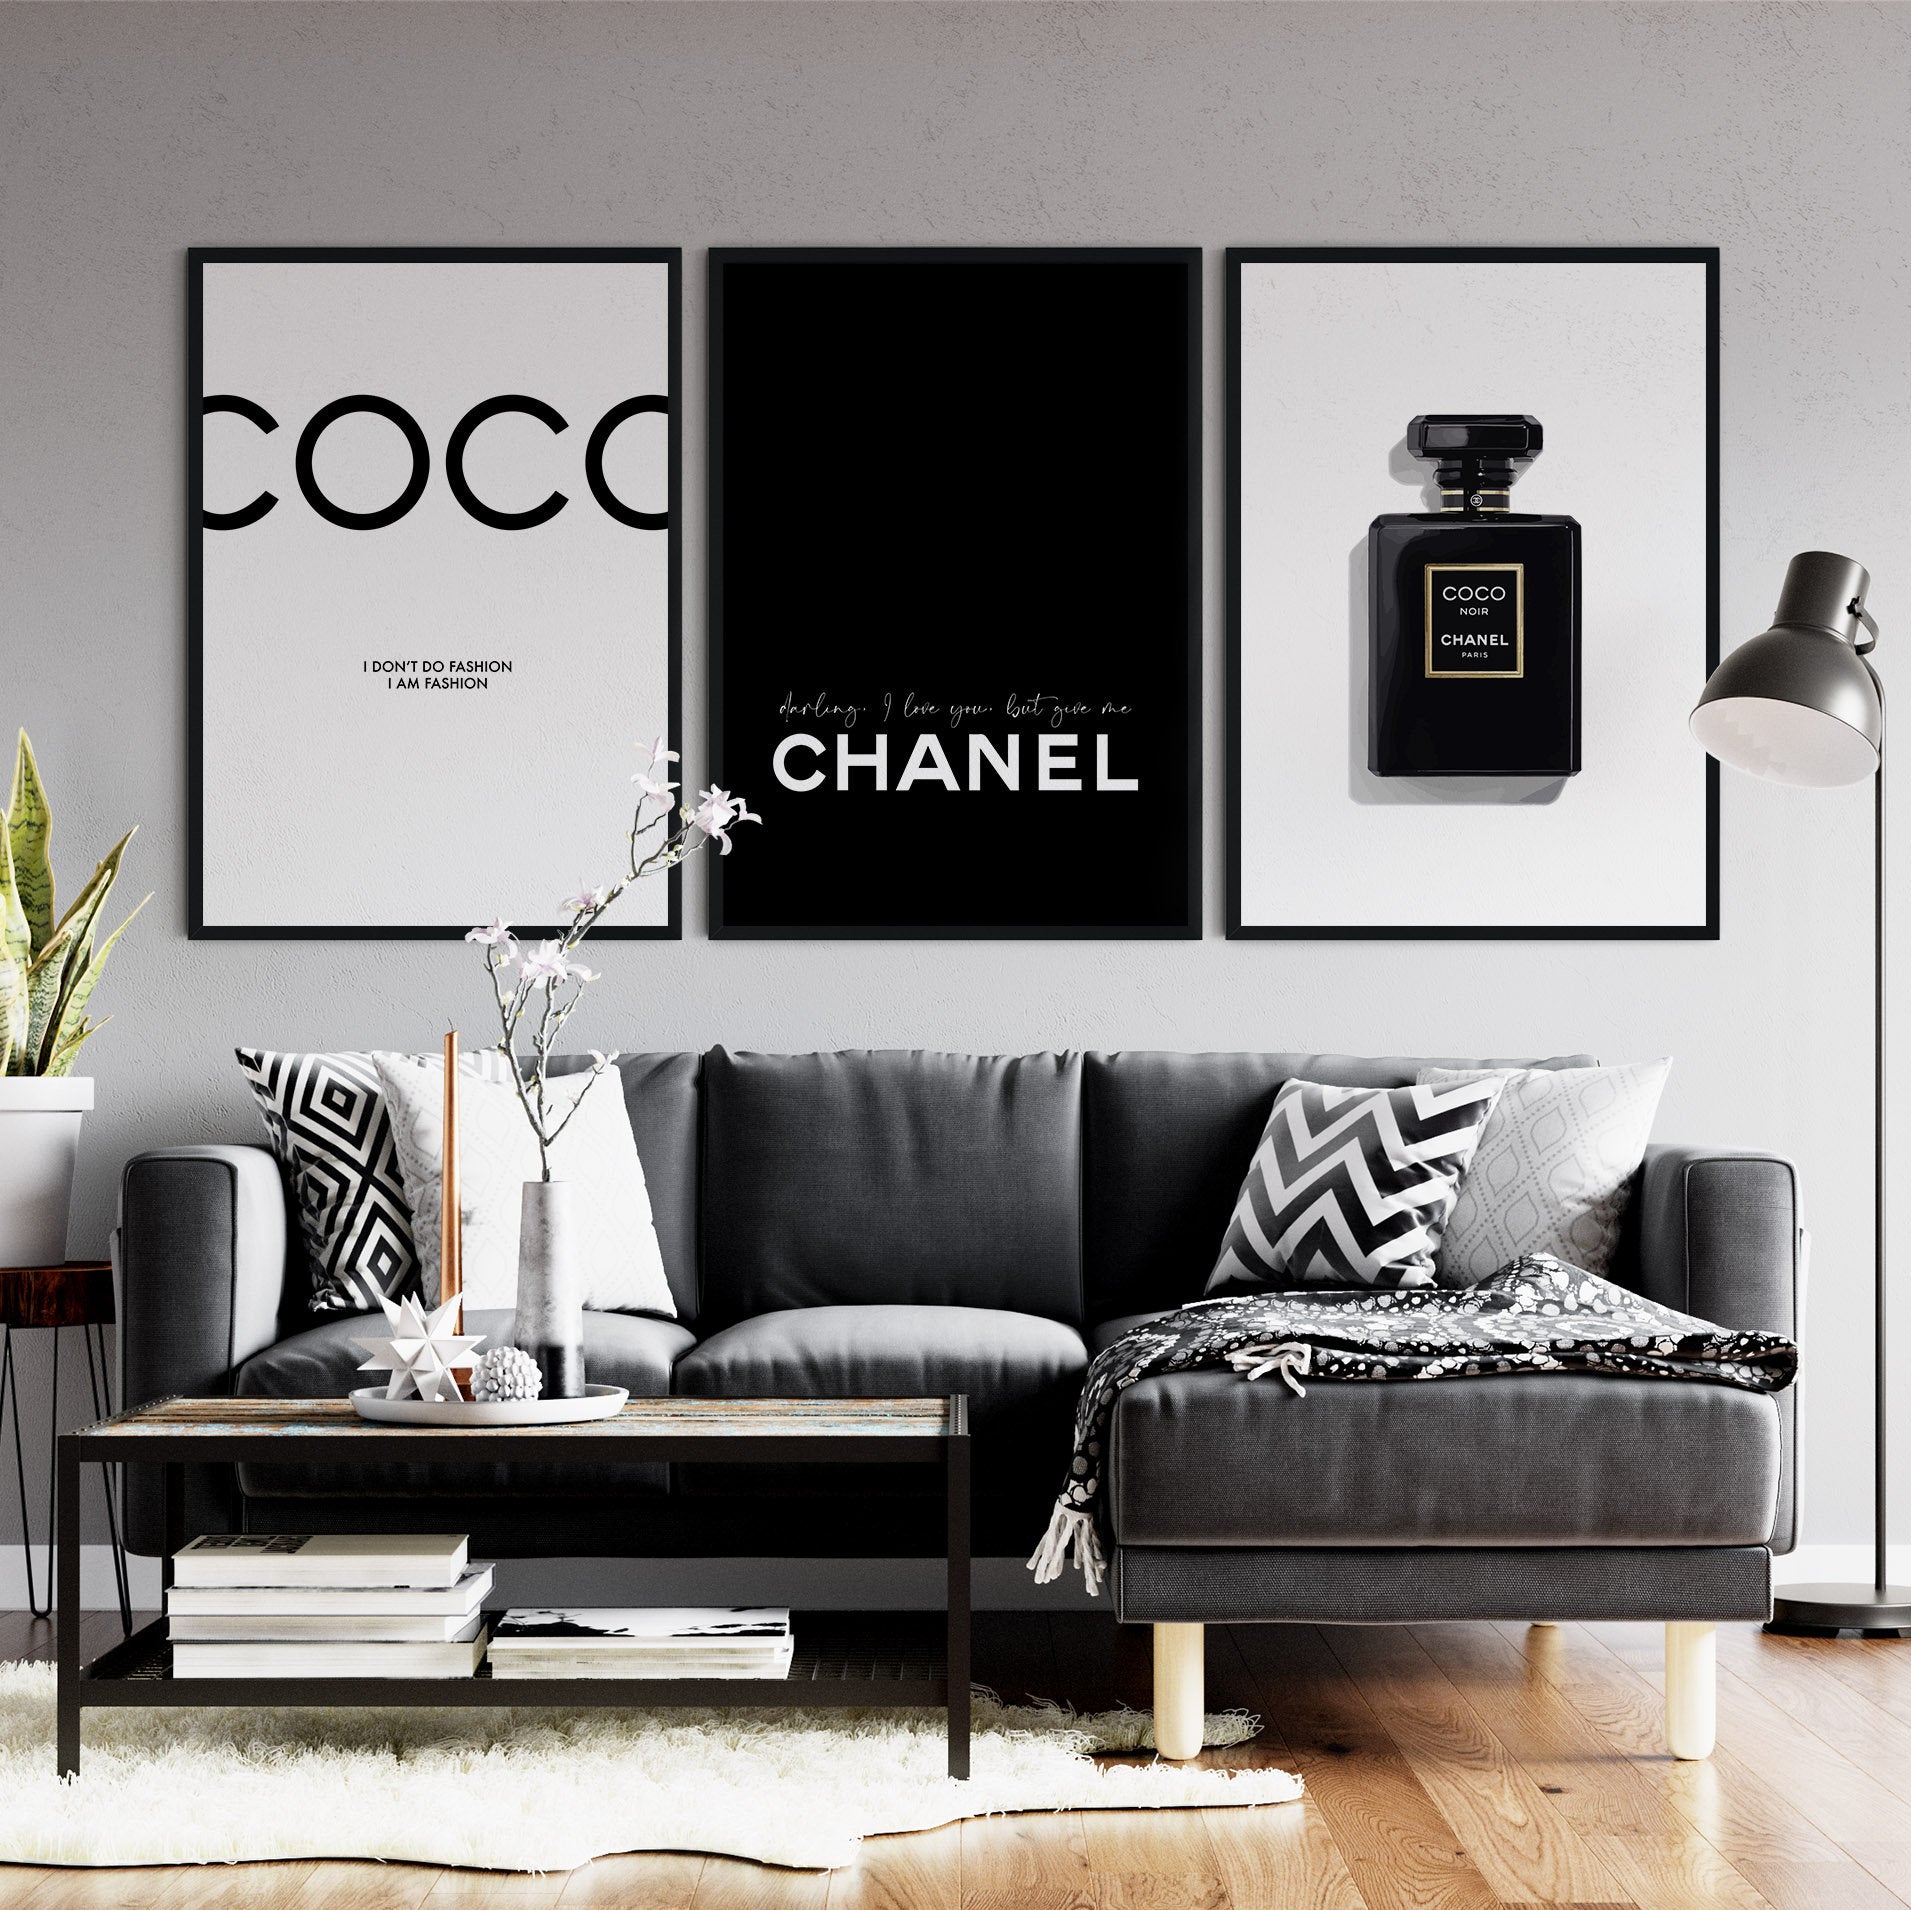 Sommerhus Army Maori Set of 3 Coco Chanel Graphical Prints | Coco Chanel Quote Prints –  TemproDesign